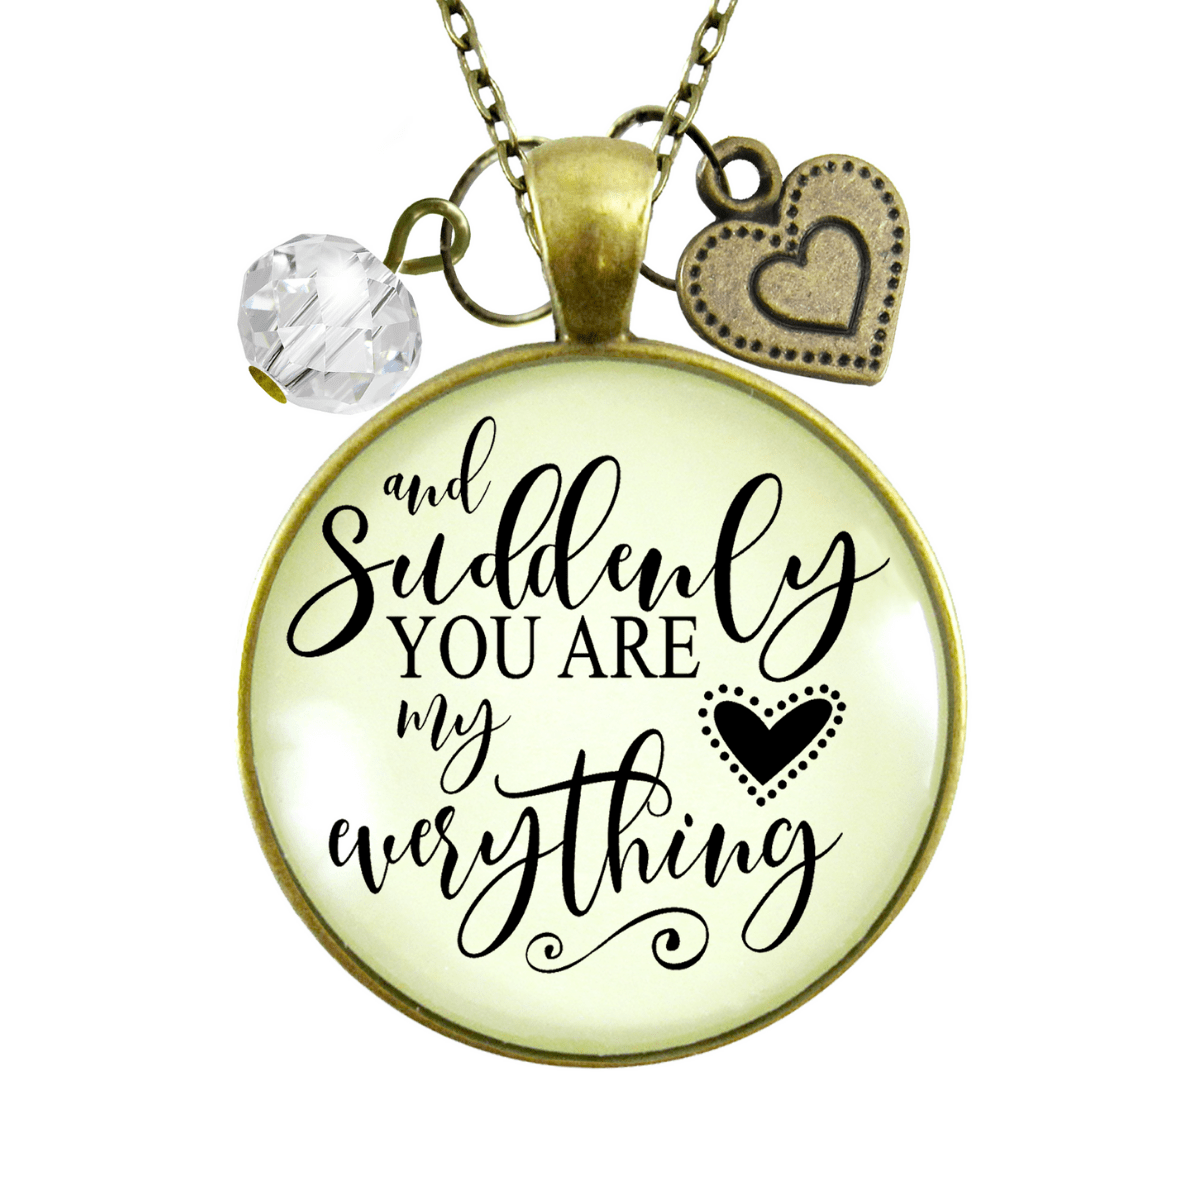 Gutsy Goodness Girlfriend Wife Special Woman Necklace From Man Sentimental Gift - Gutsy Goodness Handmade Jewelry;Girlfriend Wife Special Woman Necklace From Man Sentimental Gift - Gutsy Goodness Handmade Jewelry Gifts